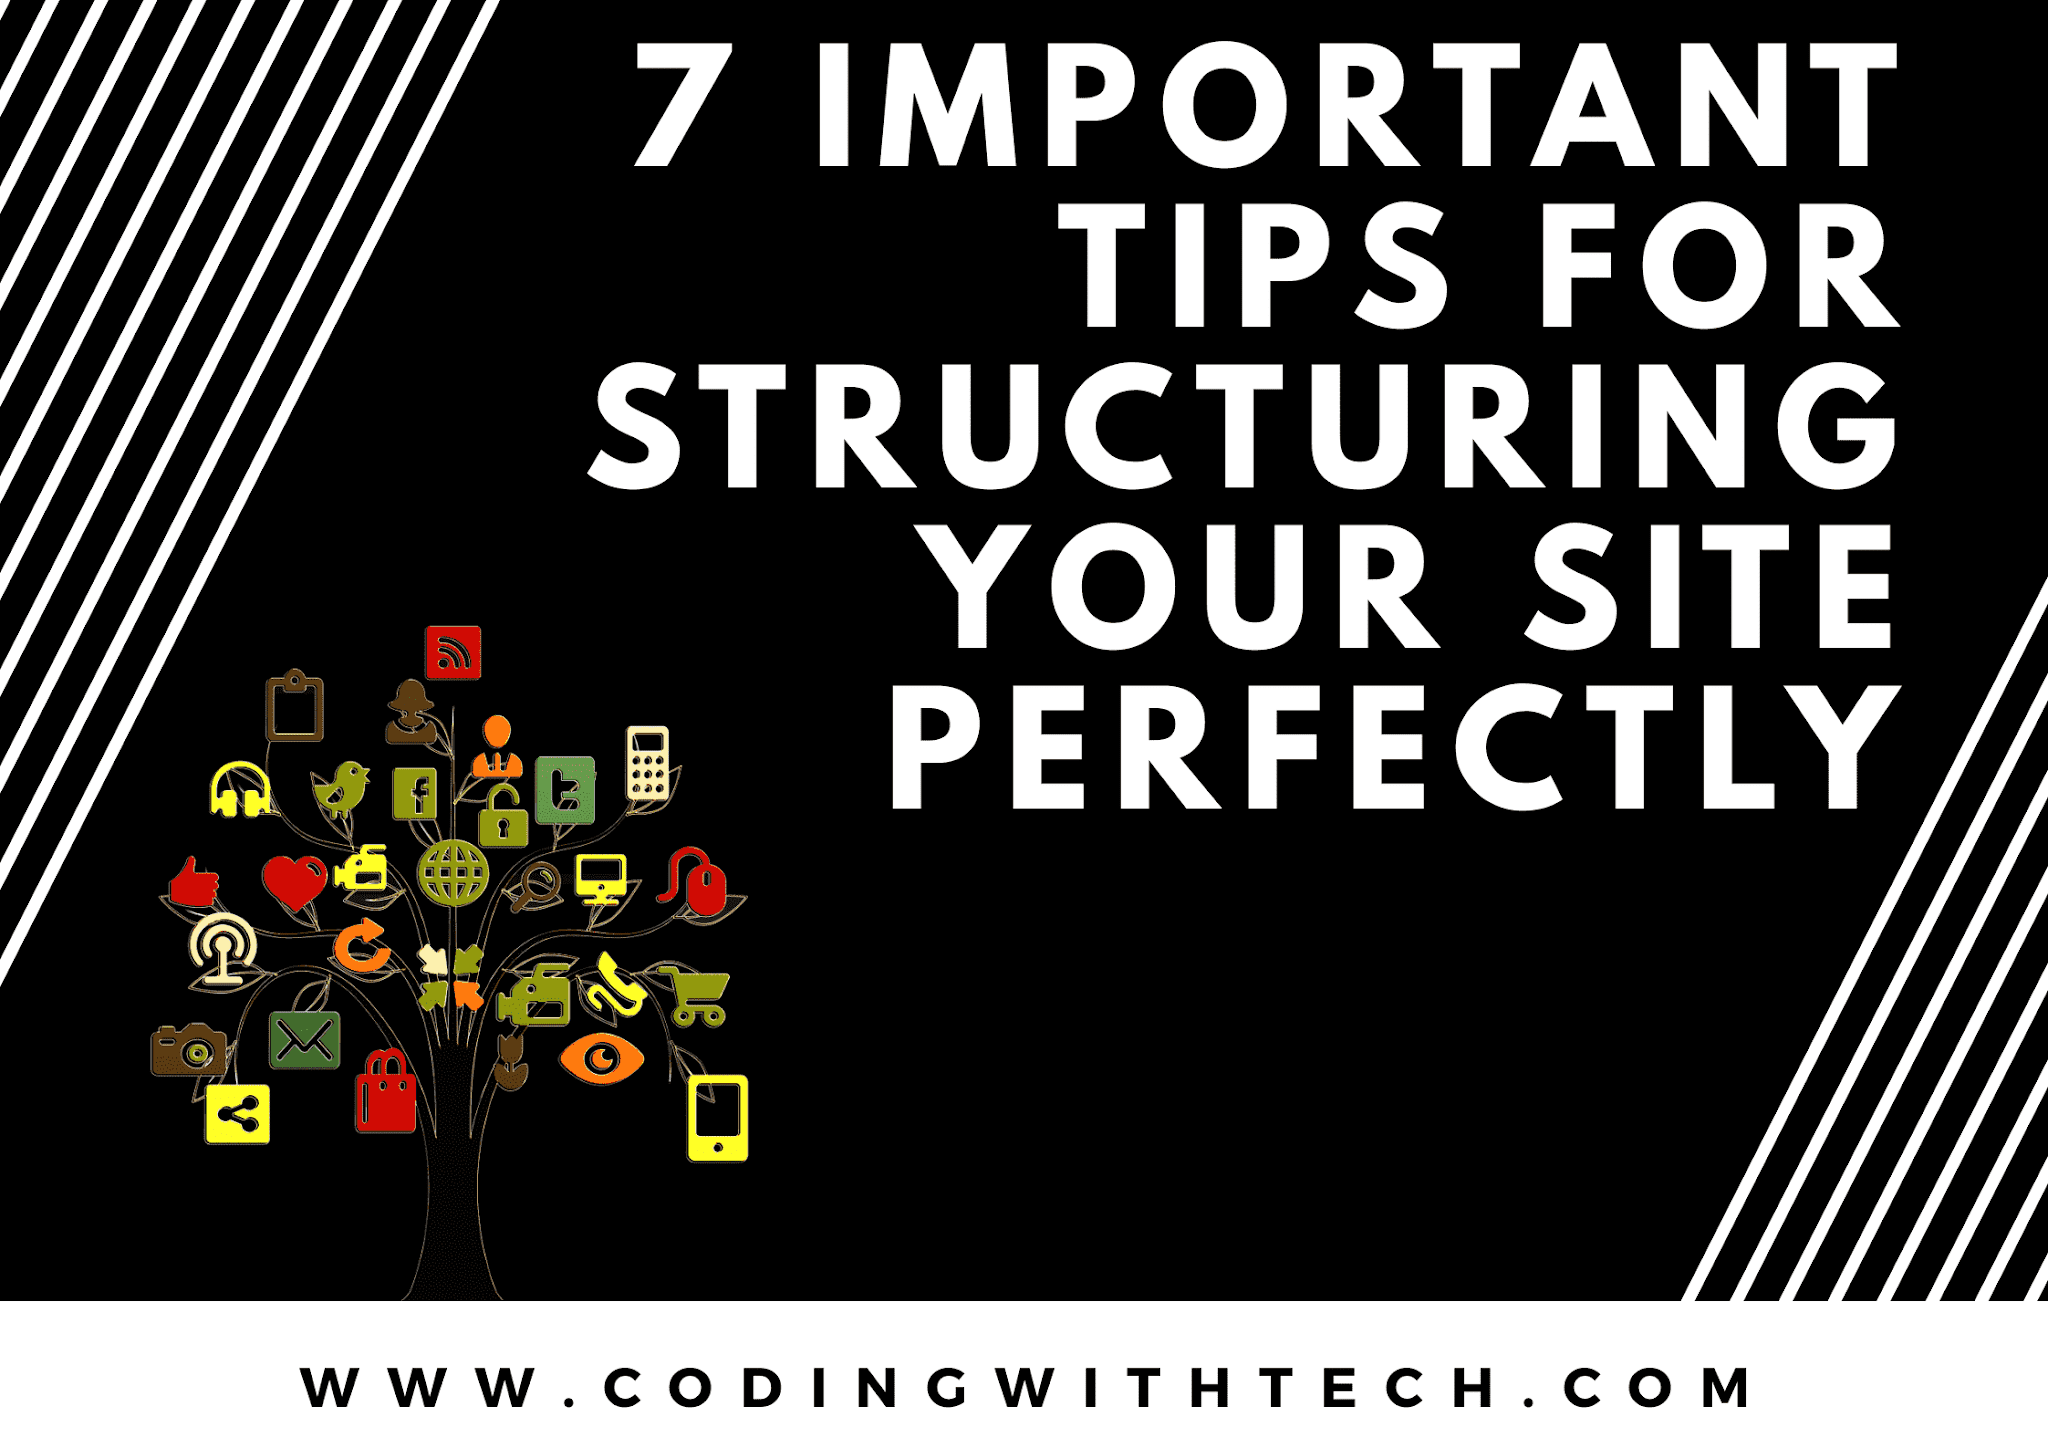 7 Important Tips for Structuring Your Website Perfectly | How to Structure a Site, Site structure, how to create site structure, structuring our site